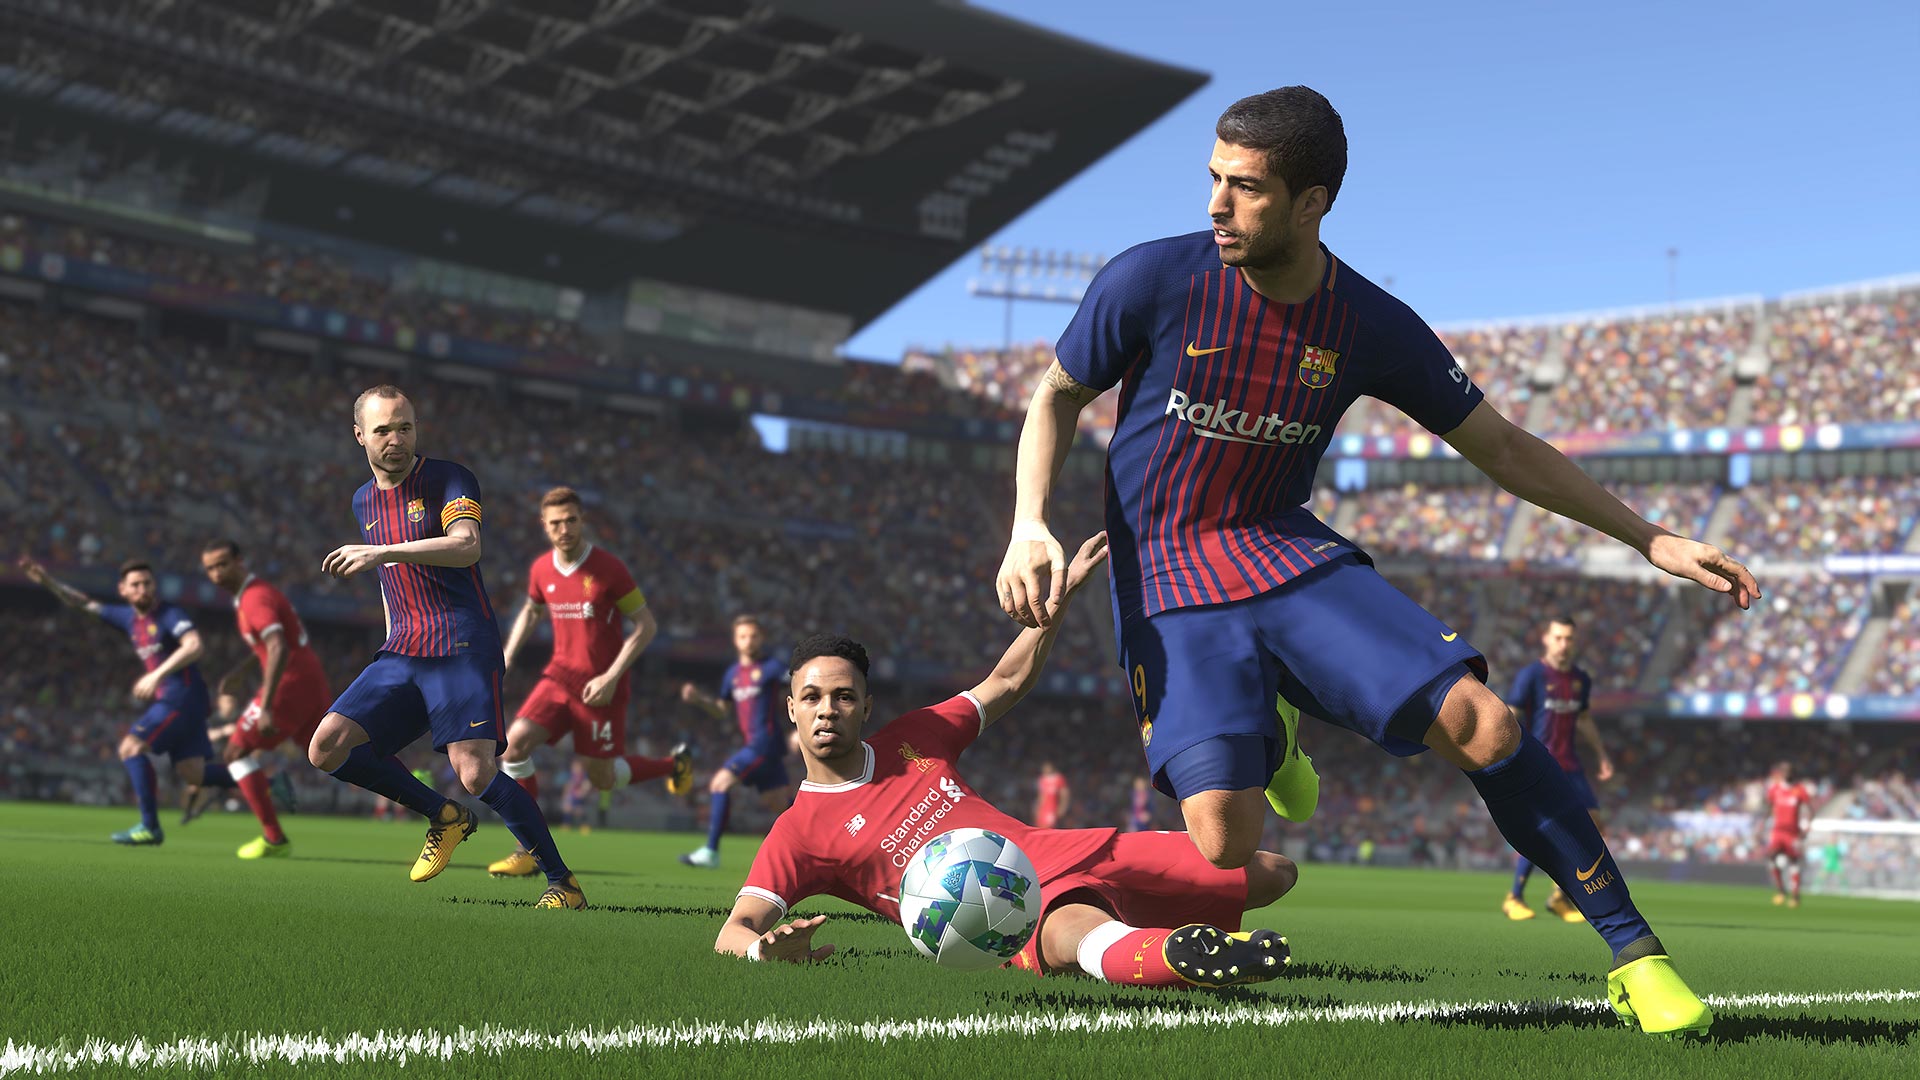 REVIEW : Pro Evolution Soccer 2018 (PS4/ PS4 Pro)